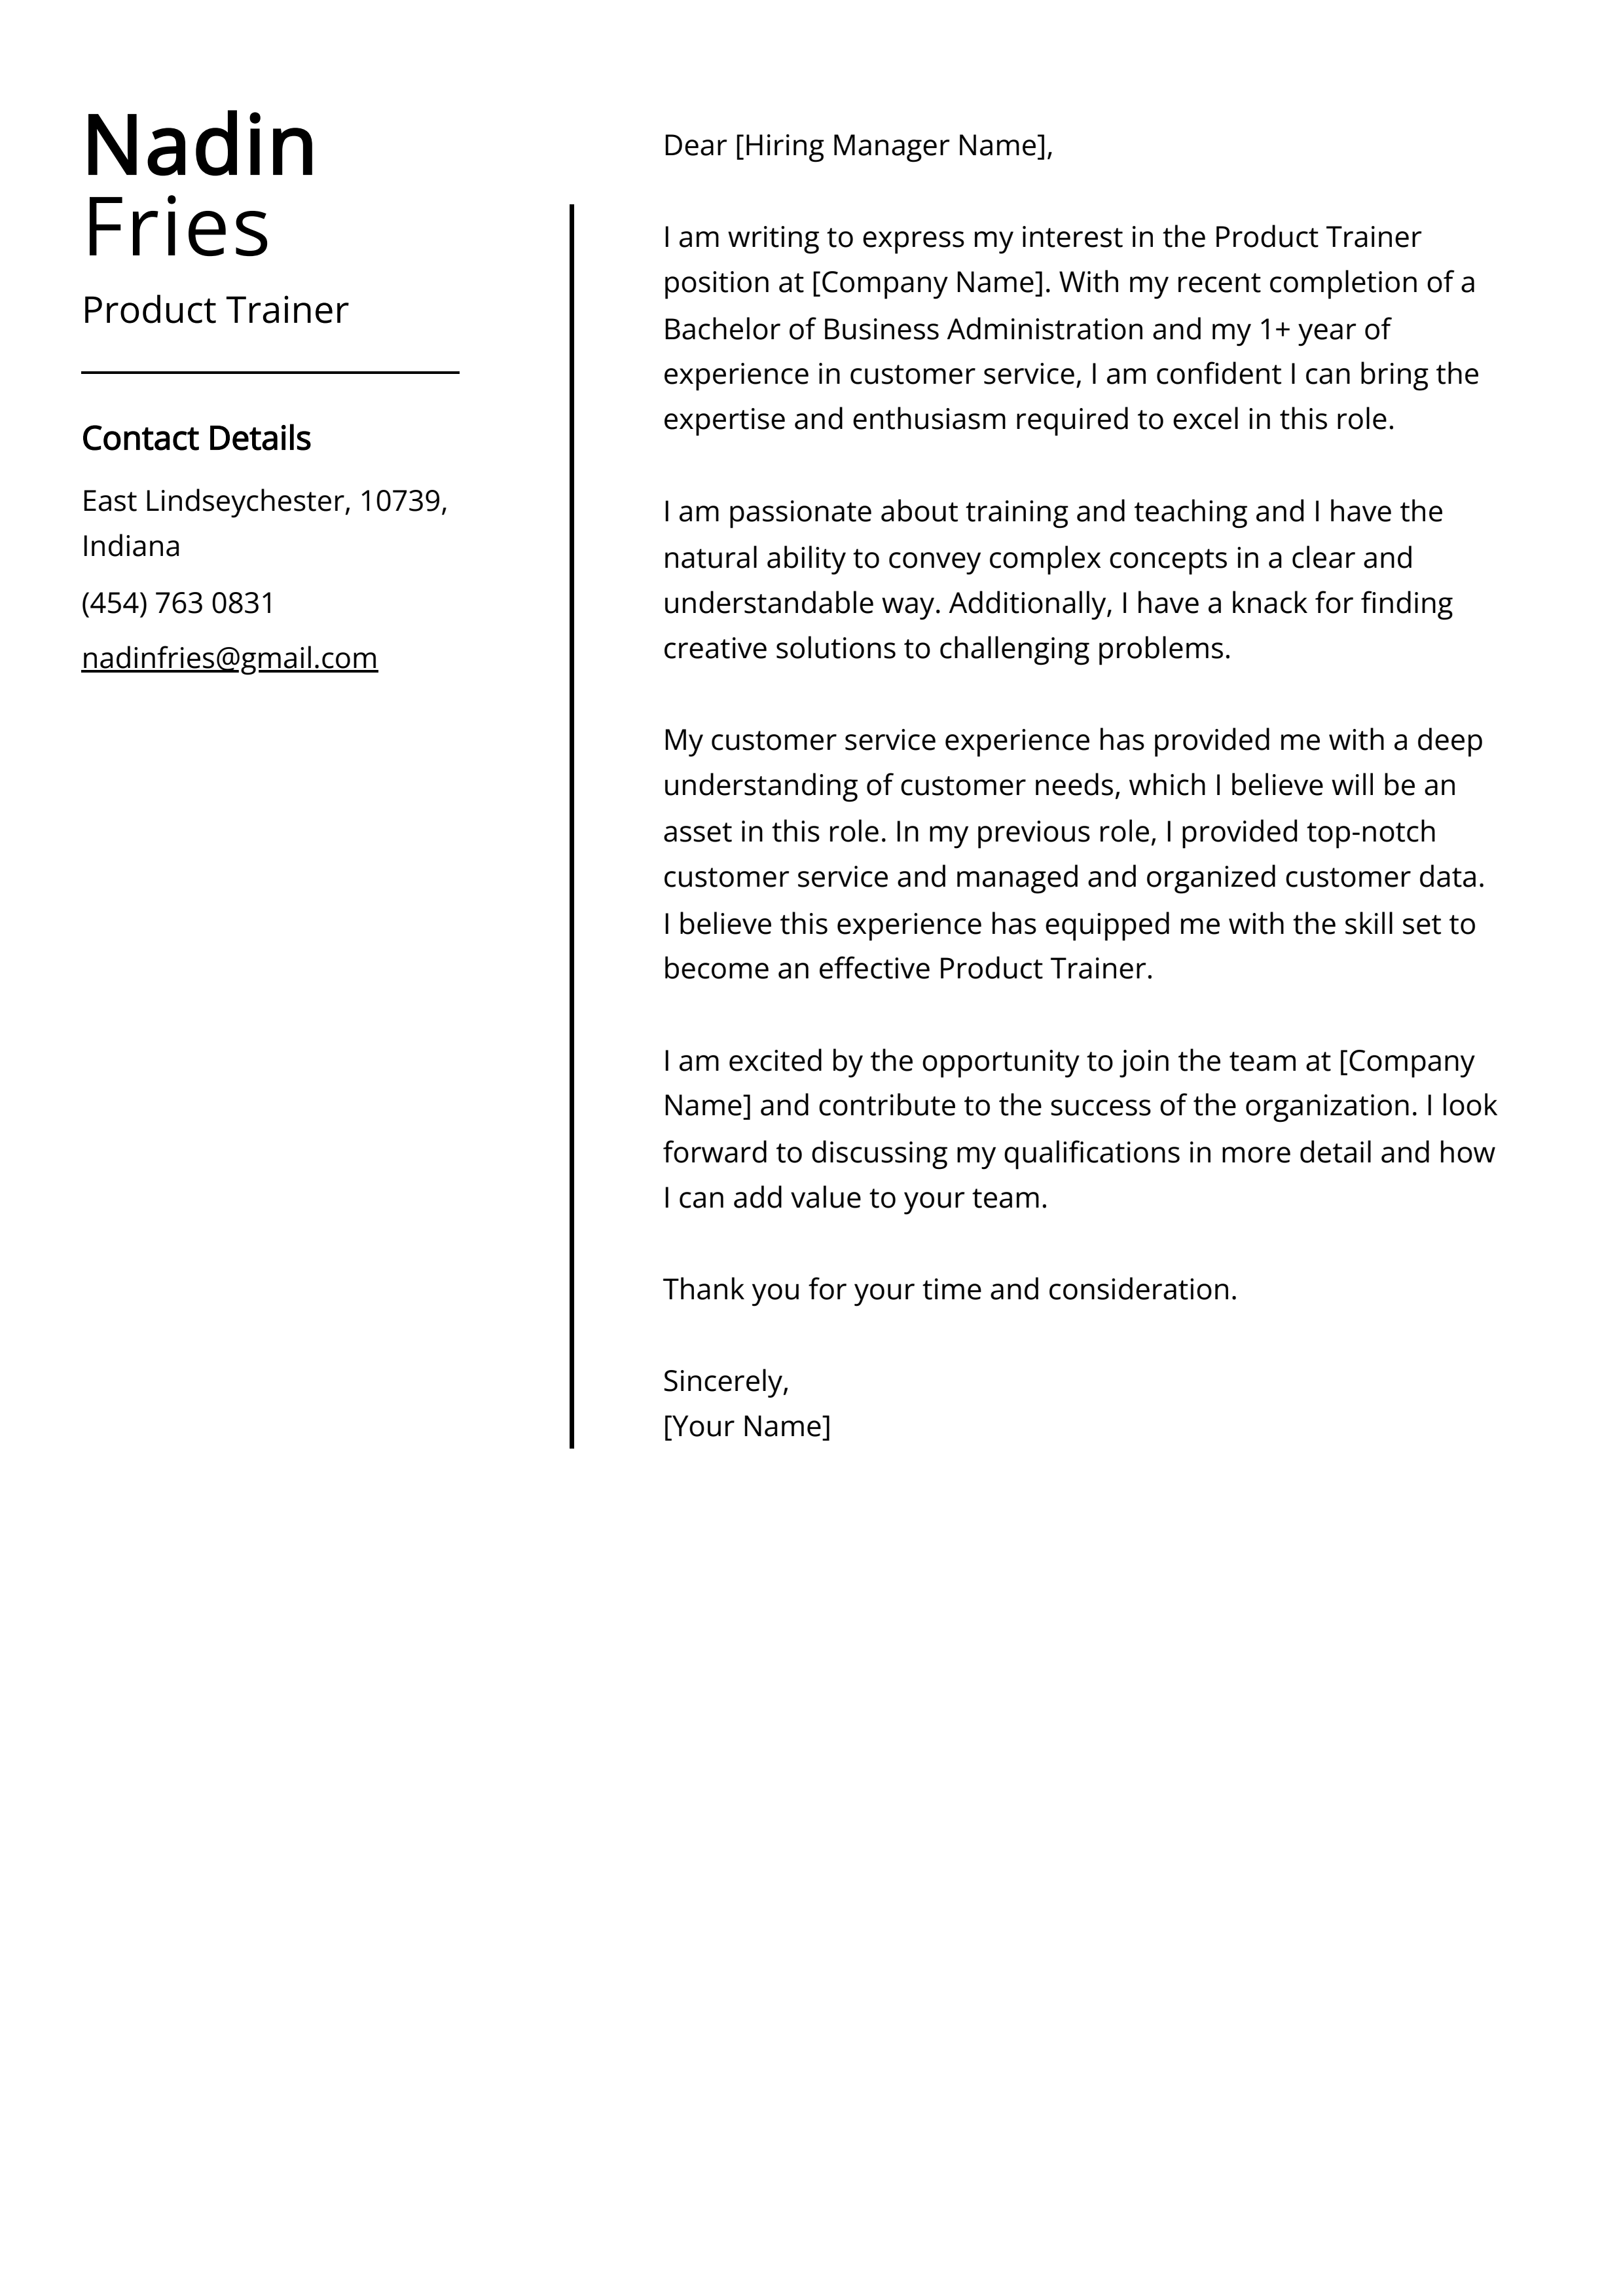 Product Trainer Cover Letter Example